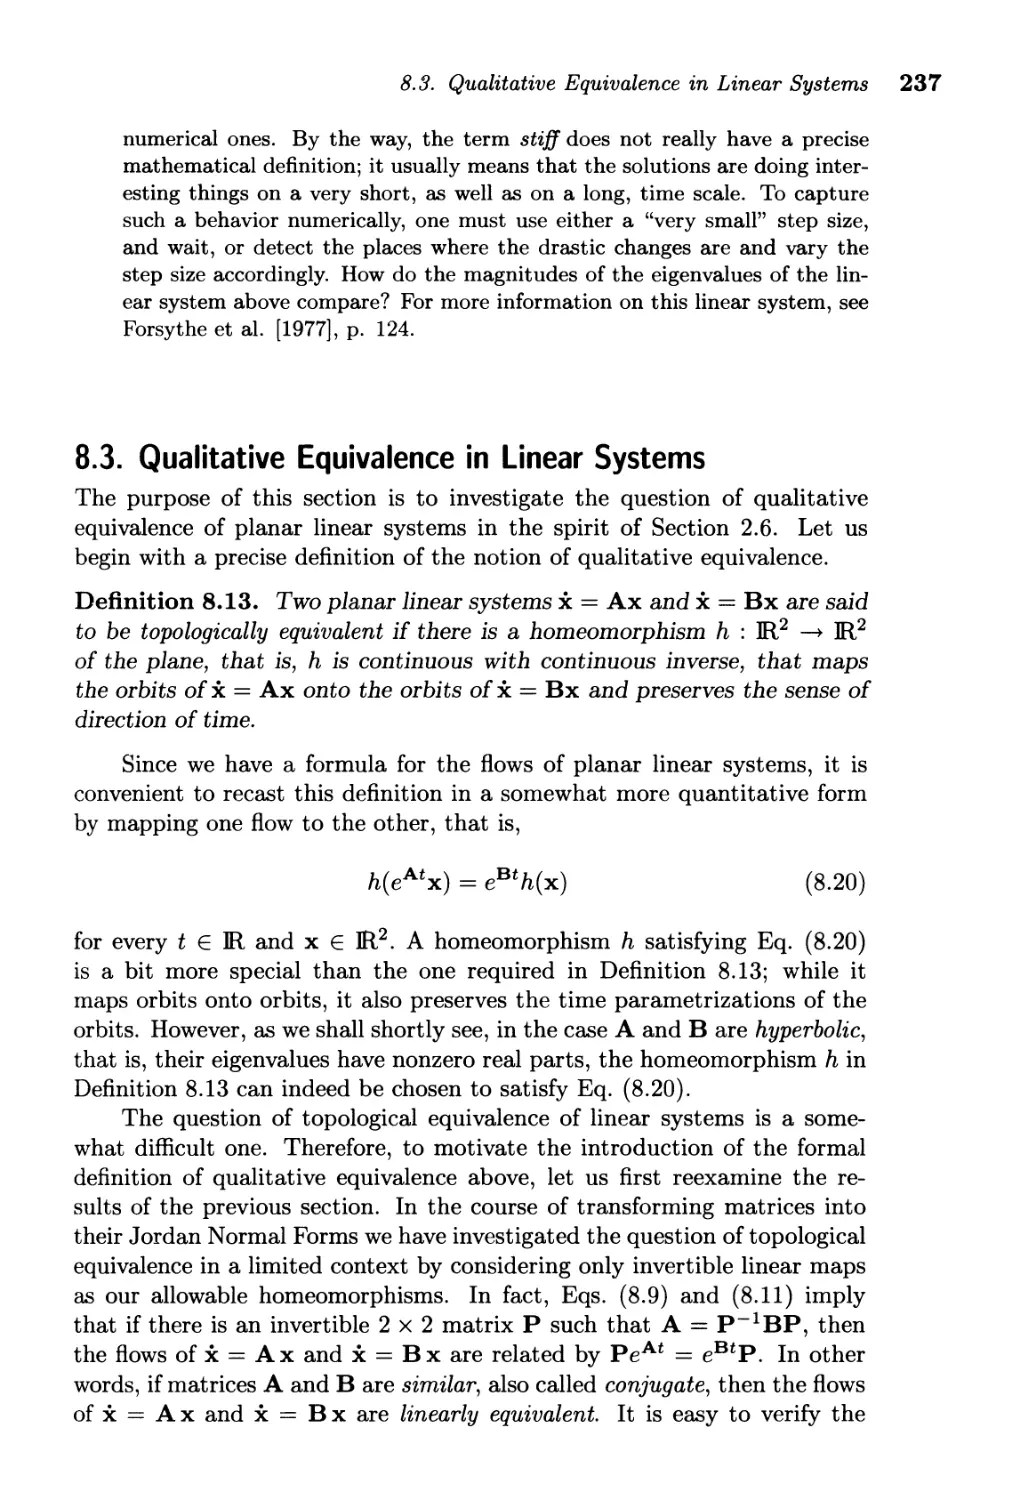 8.3. Qualitative Equivalence in Linear Systems